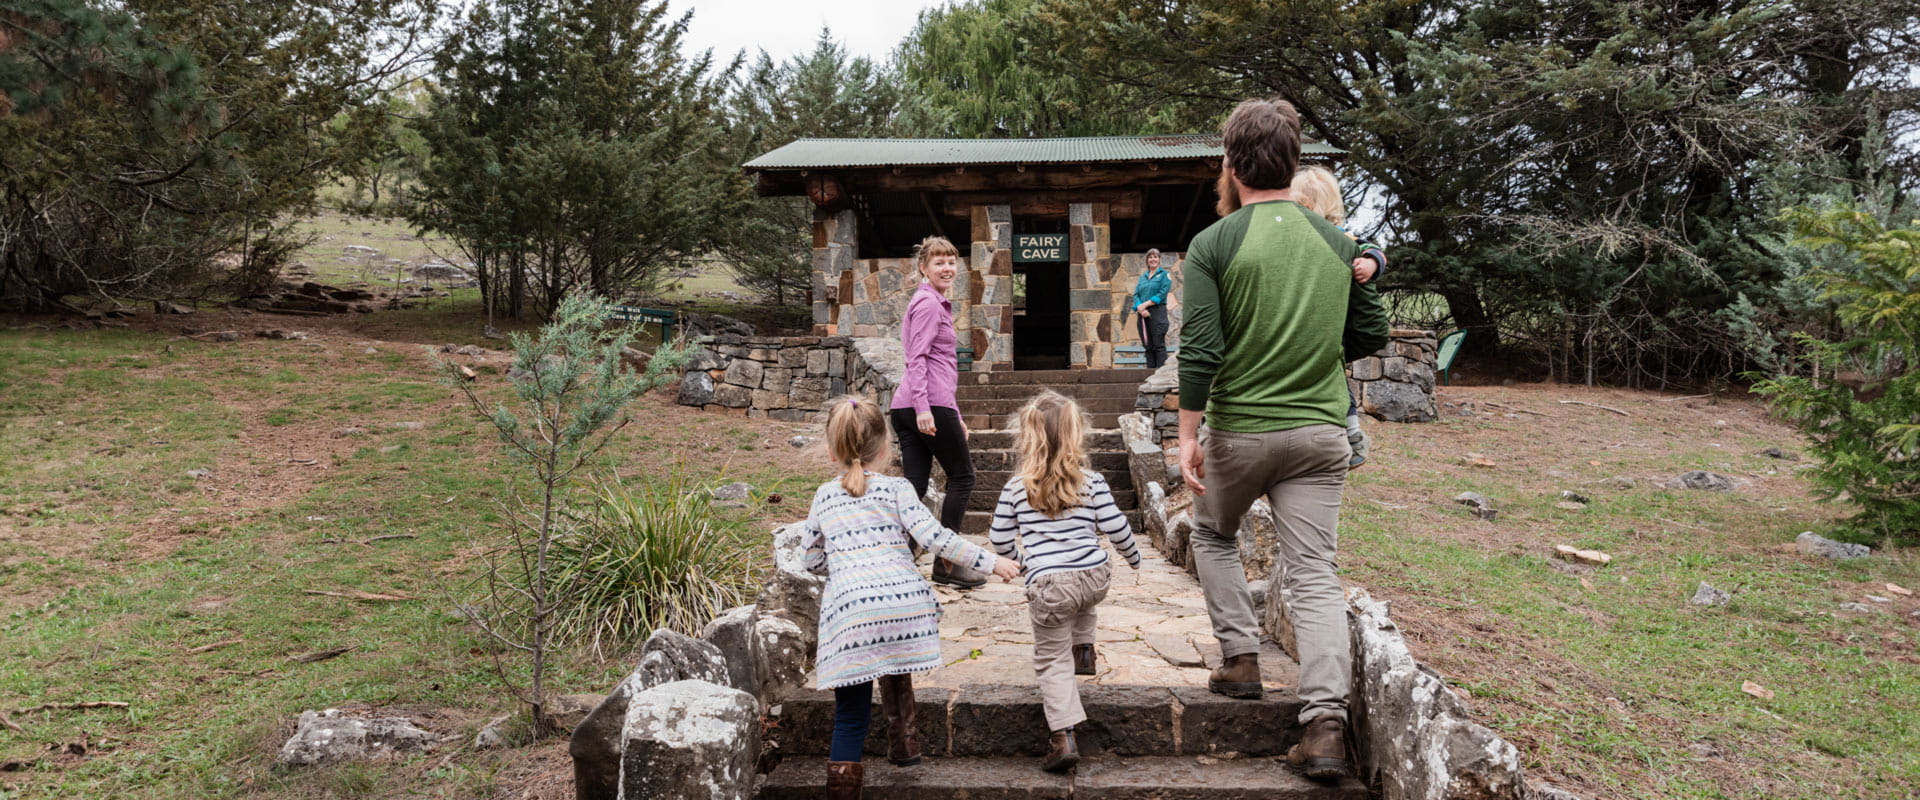 A young family walk up the rock steps and path leading to a waiting park ranger outside the stone entrance of the Fairy Cave.